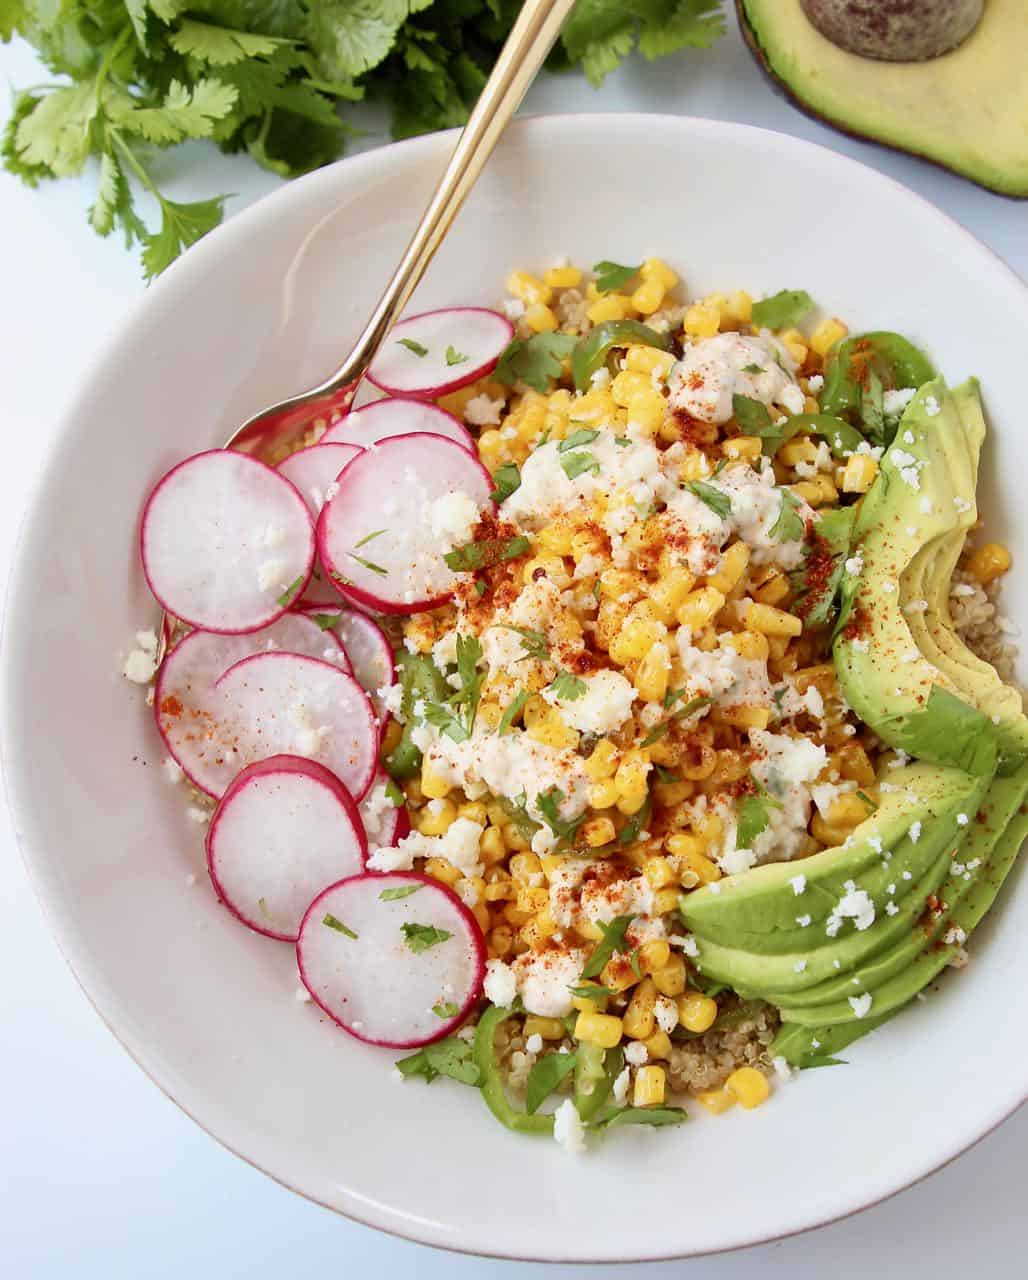 Bowl filled with corn, avocado, radishes and cilantro